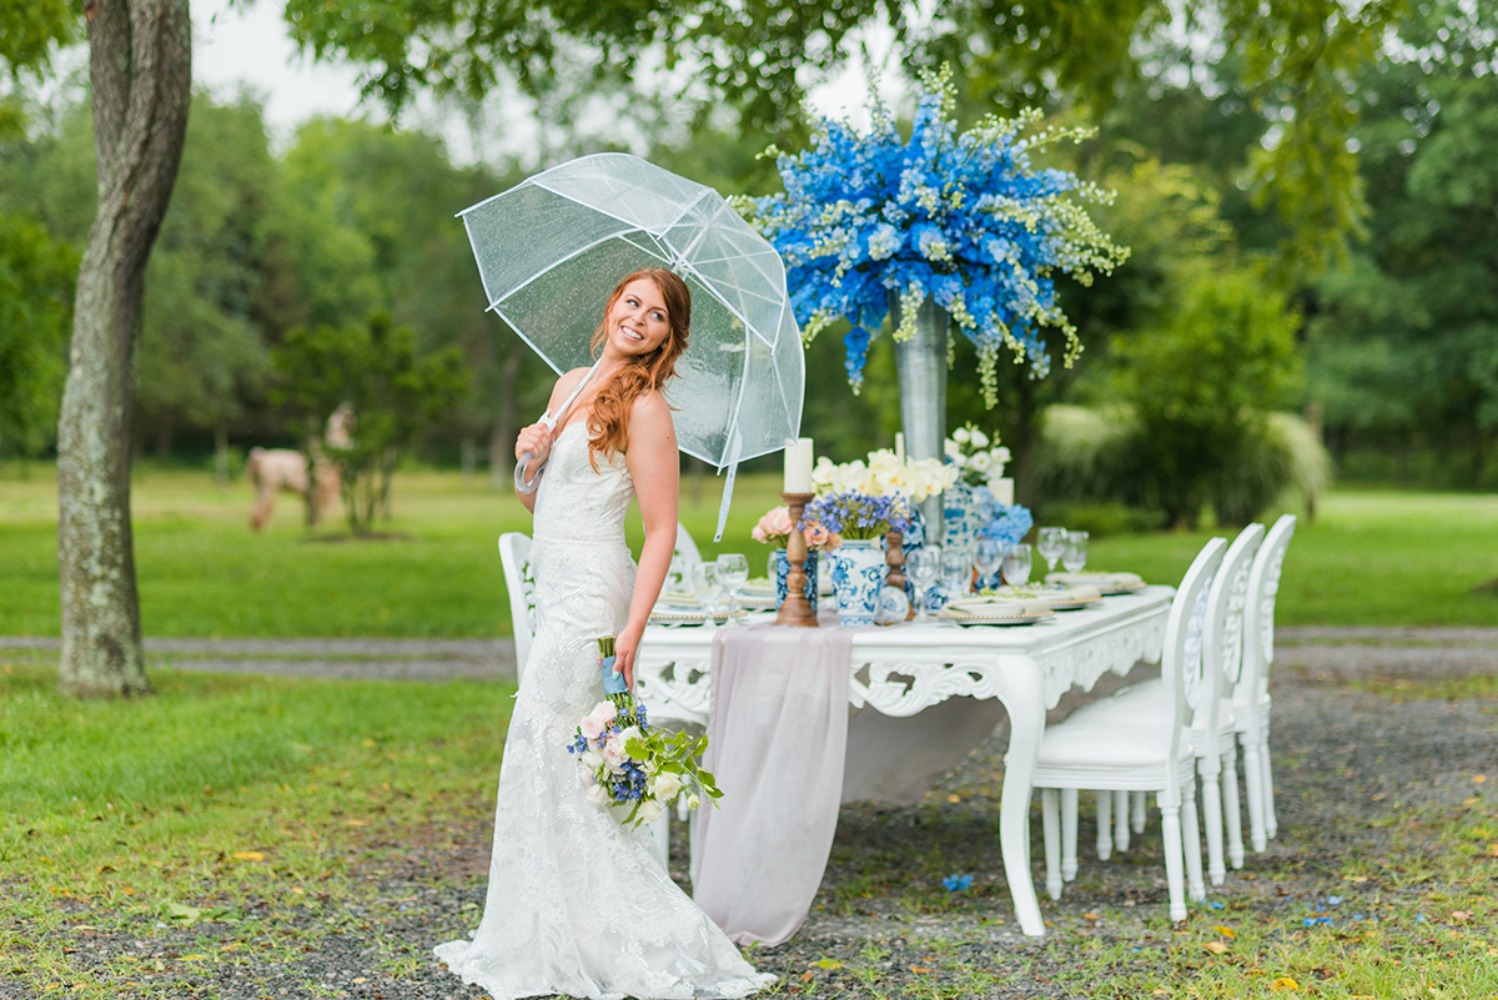 blue and white wedding reception